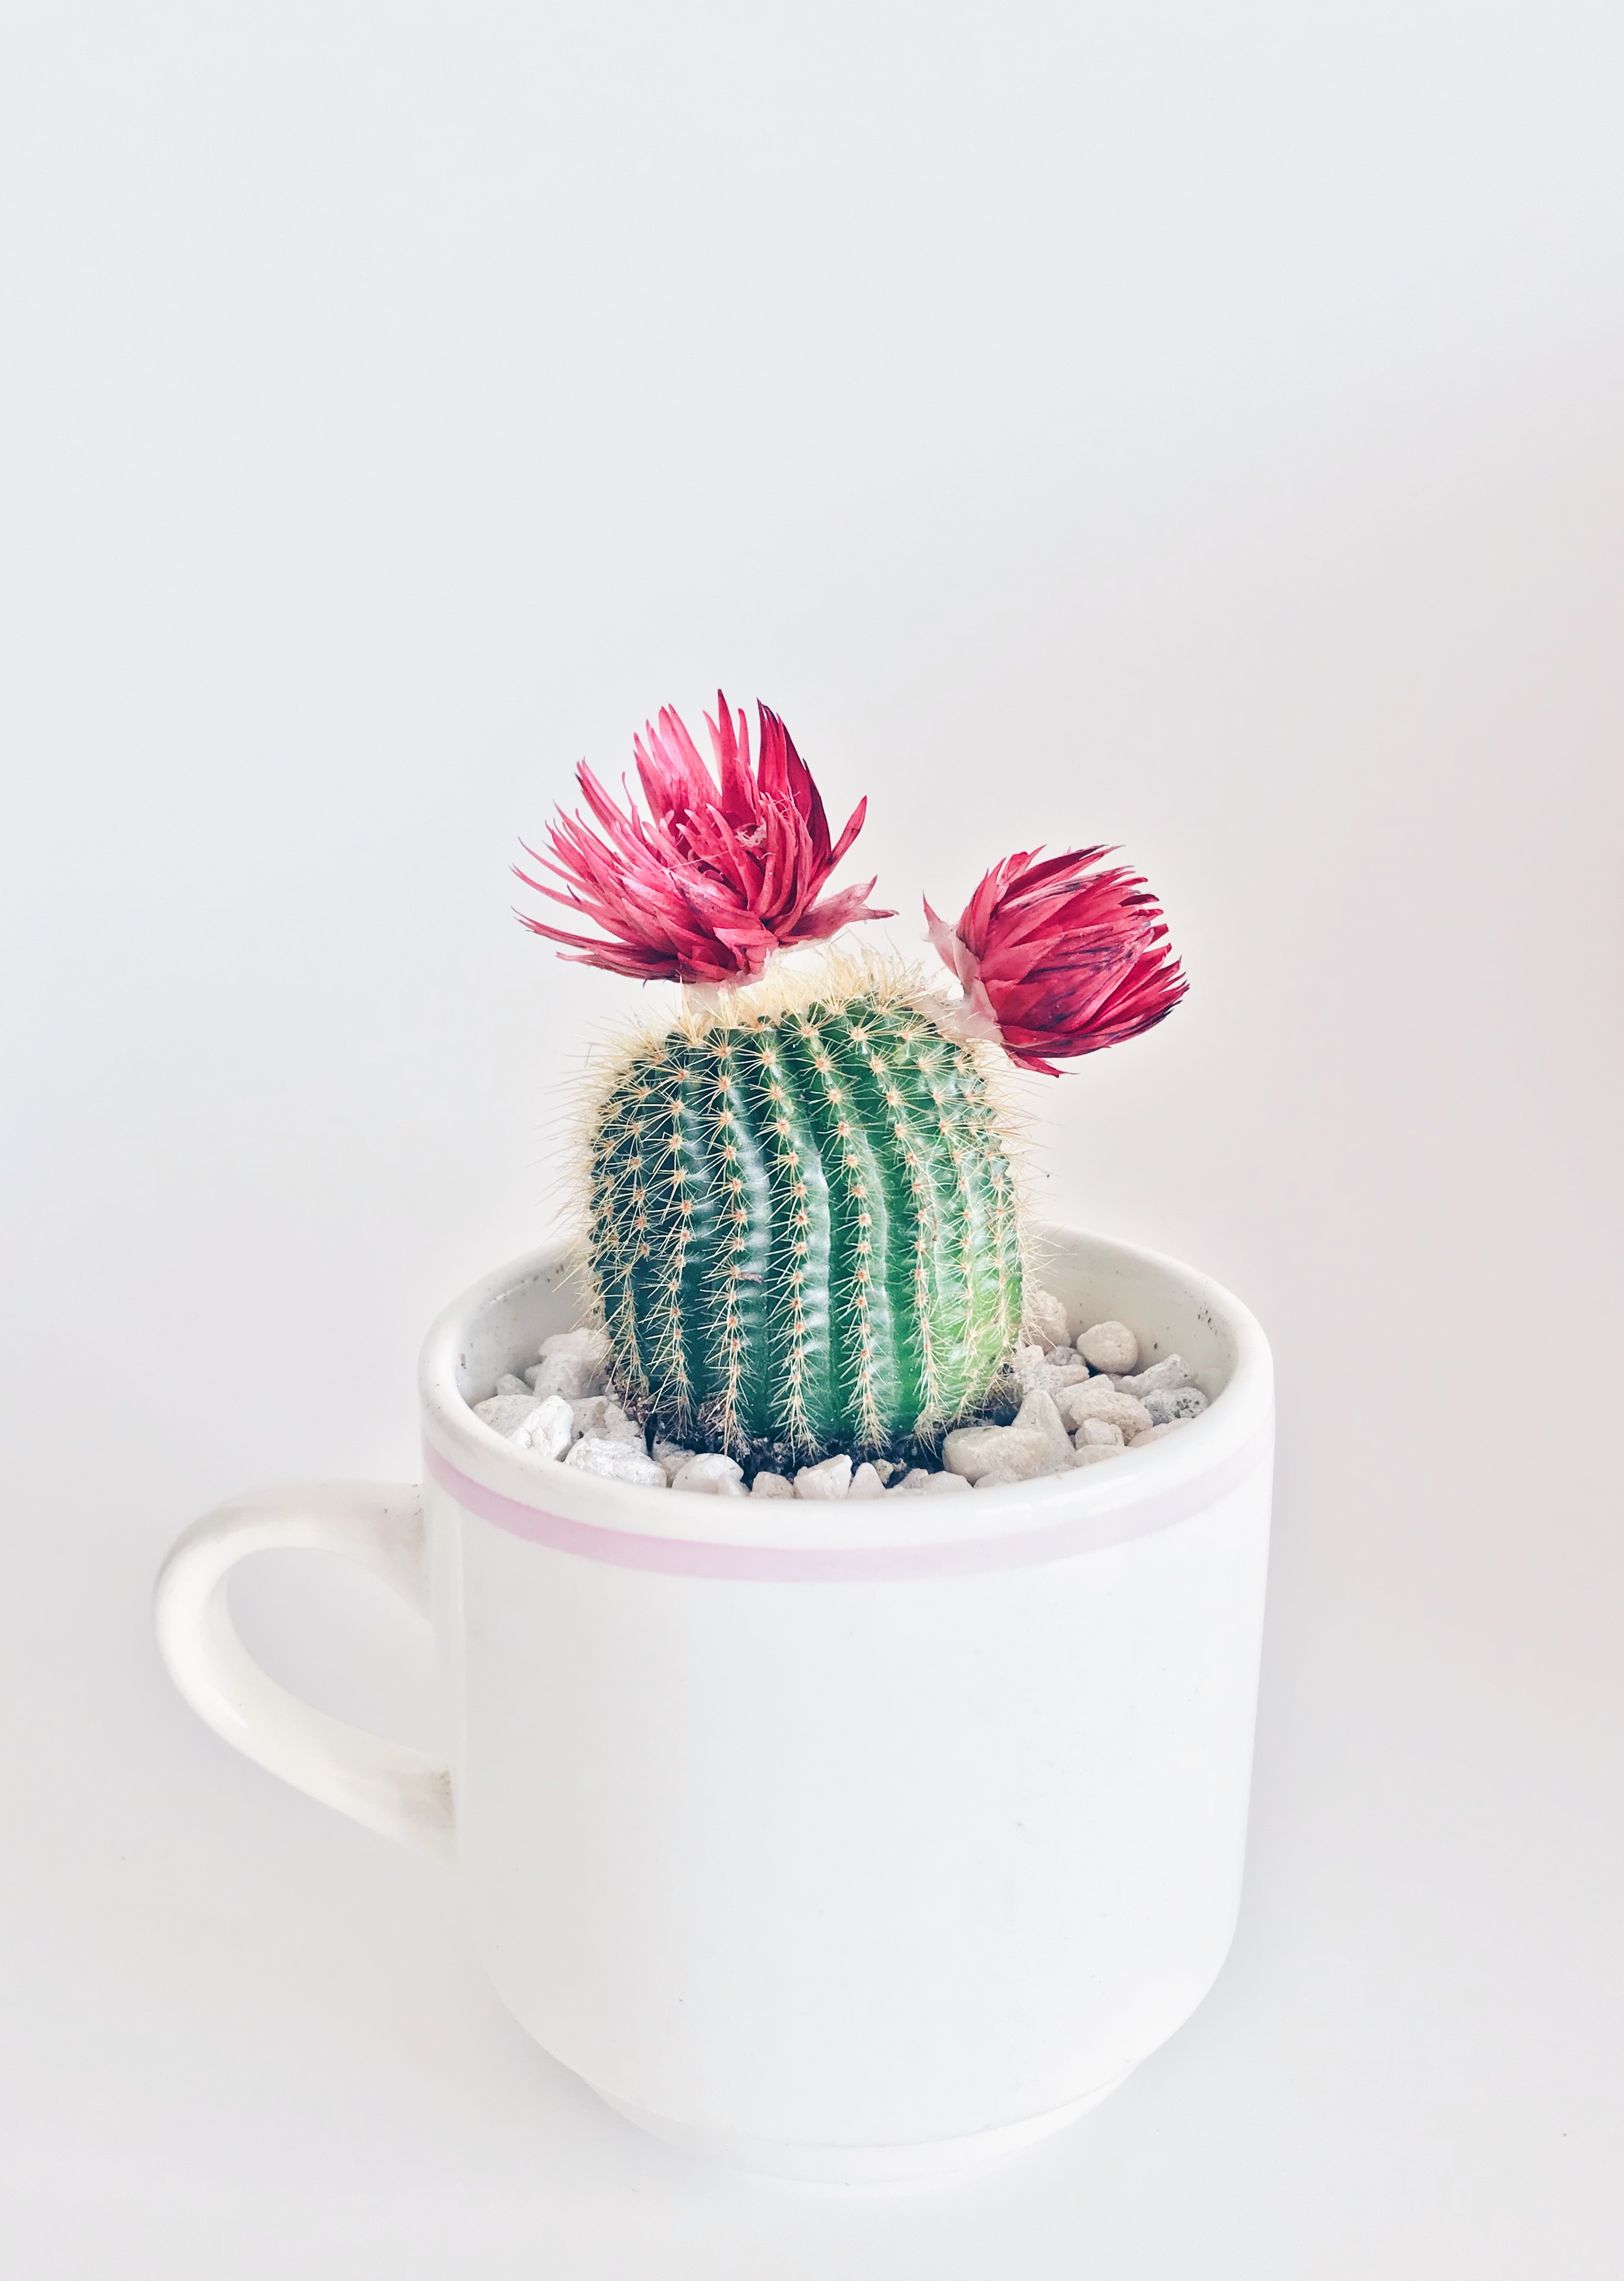 White Cactus Wallpapers